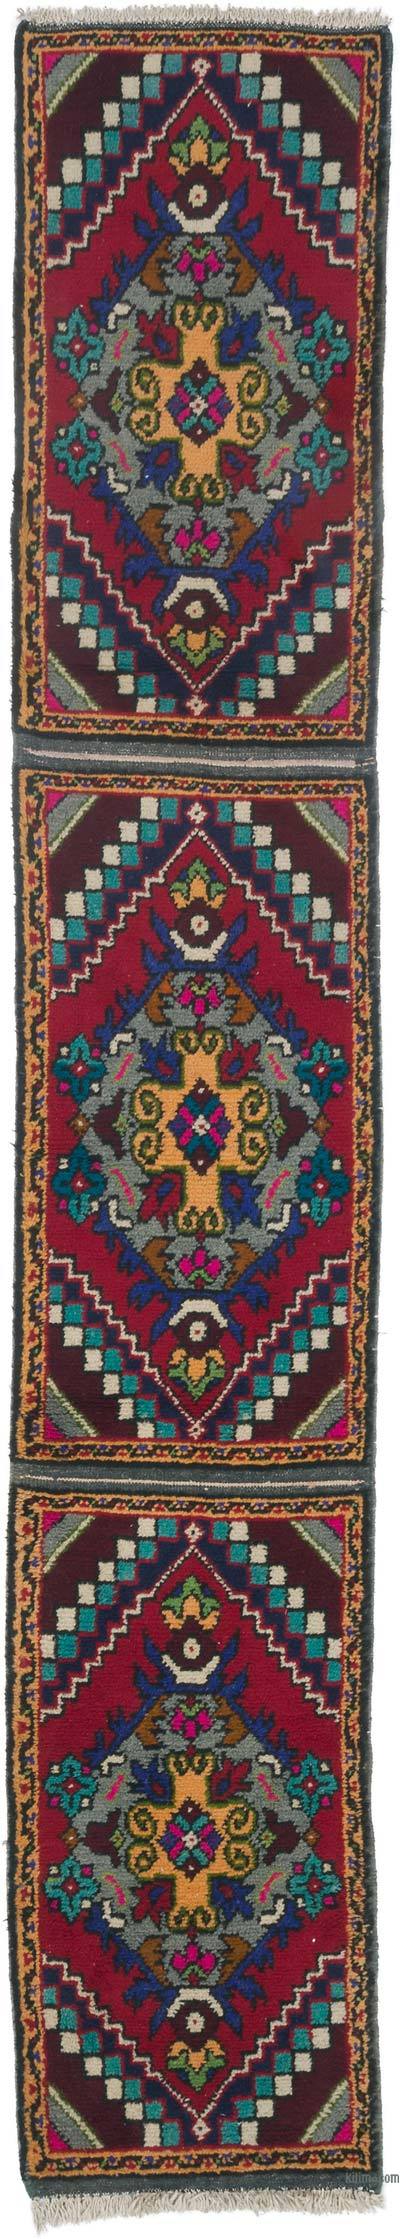 Vintage Turkish Hand-Knotted Runner - 1' 7" x 9' 4" (19 in. x 112 in.)